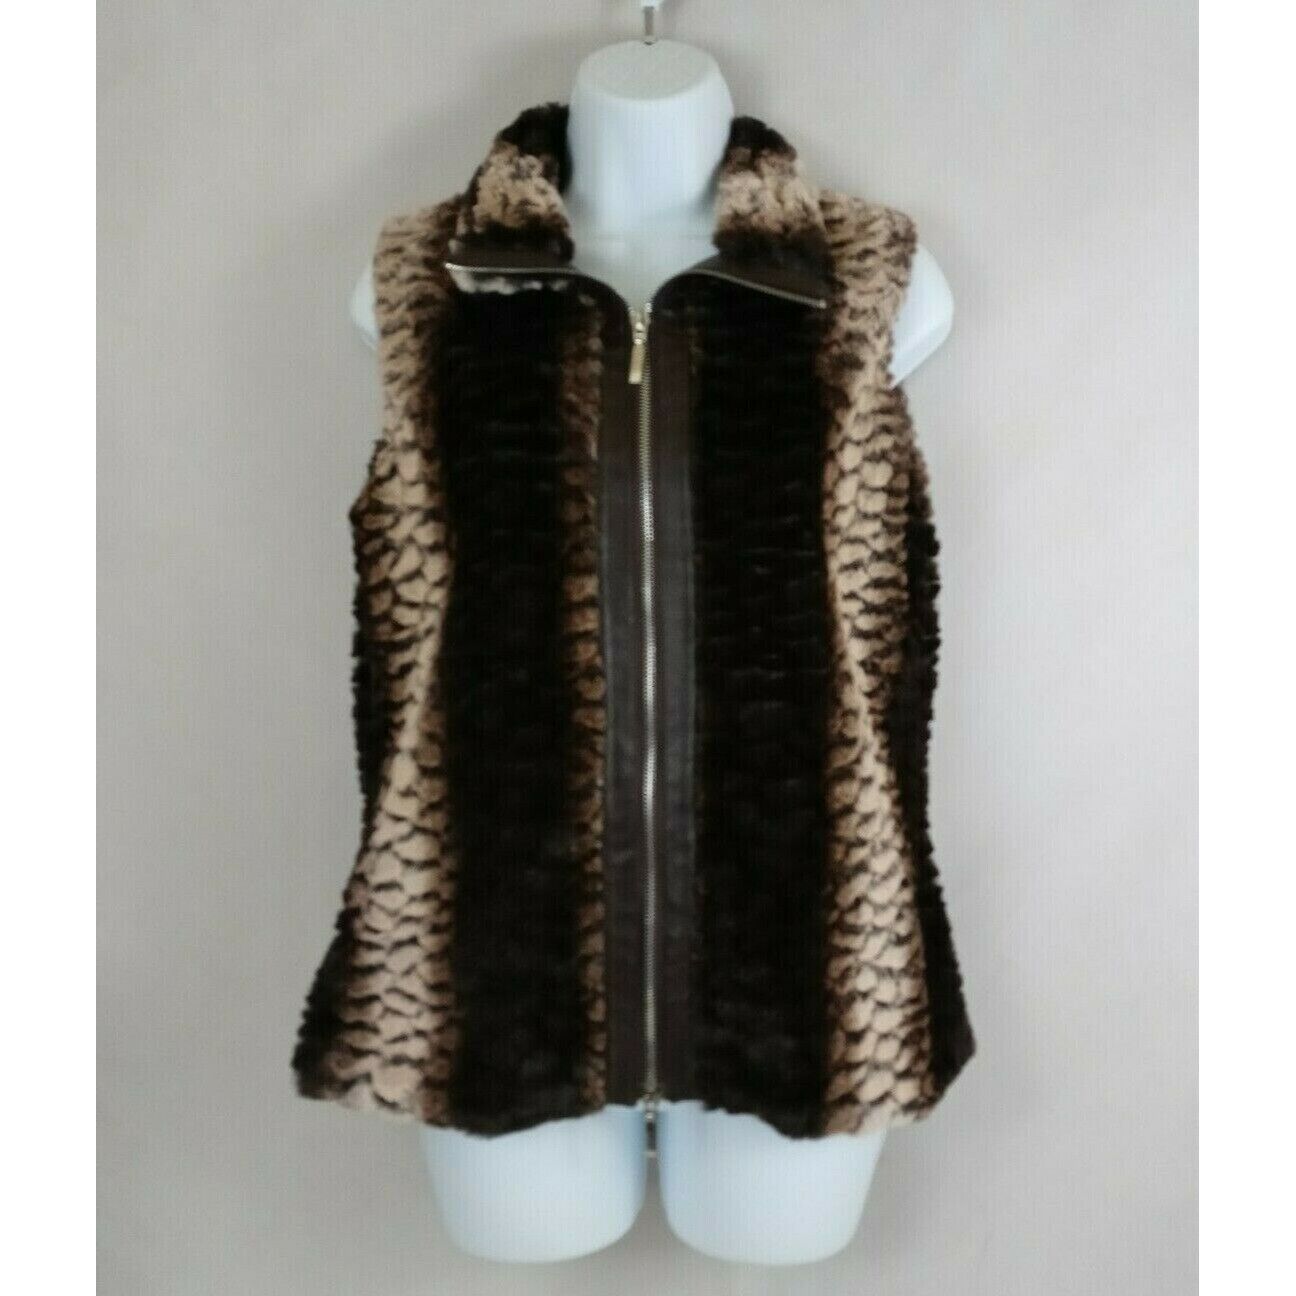 Primary image for Belldini Women's Contrast Faux Fur Animal Print Brown & Tan Vest Size Small